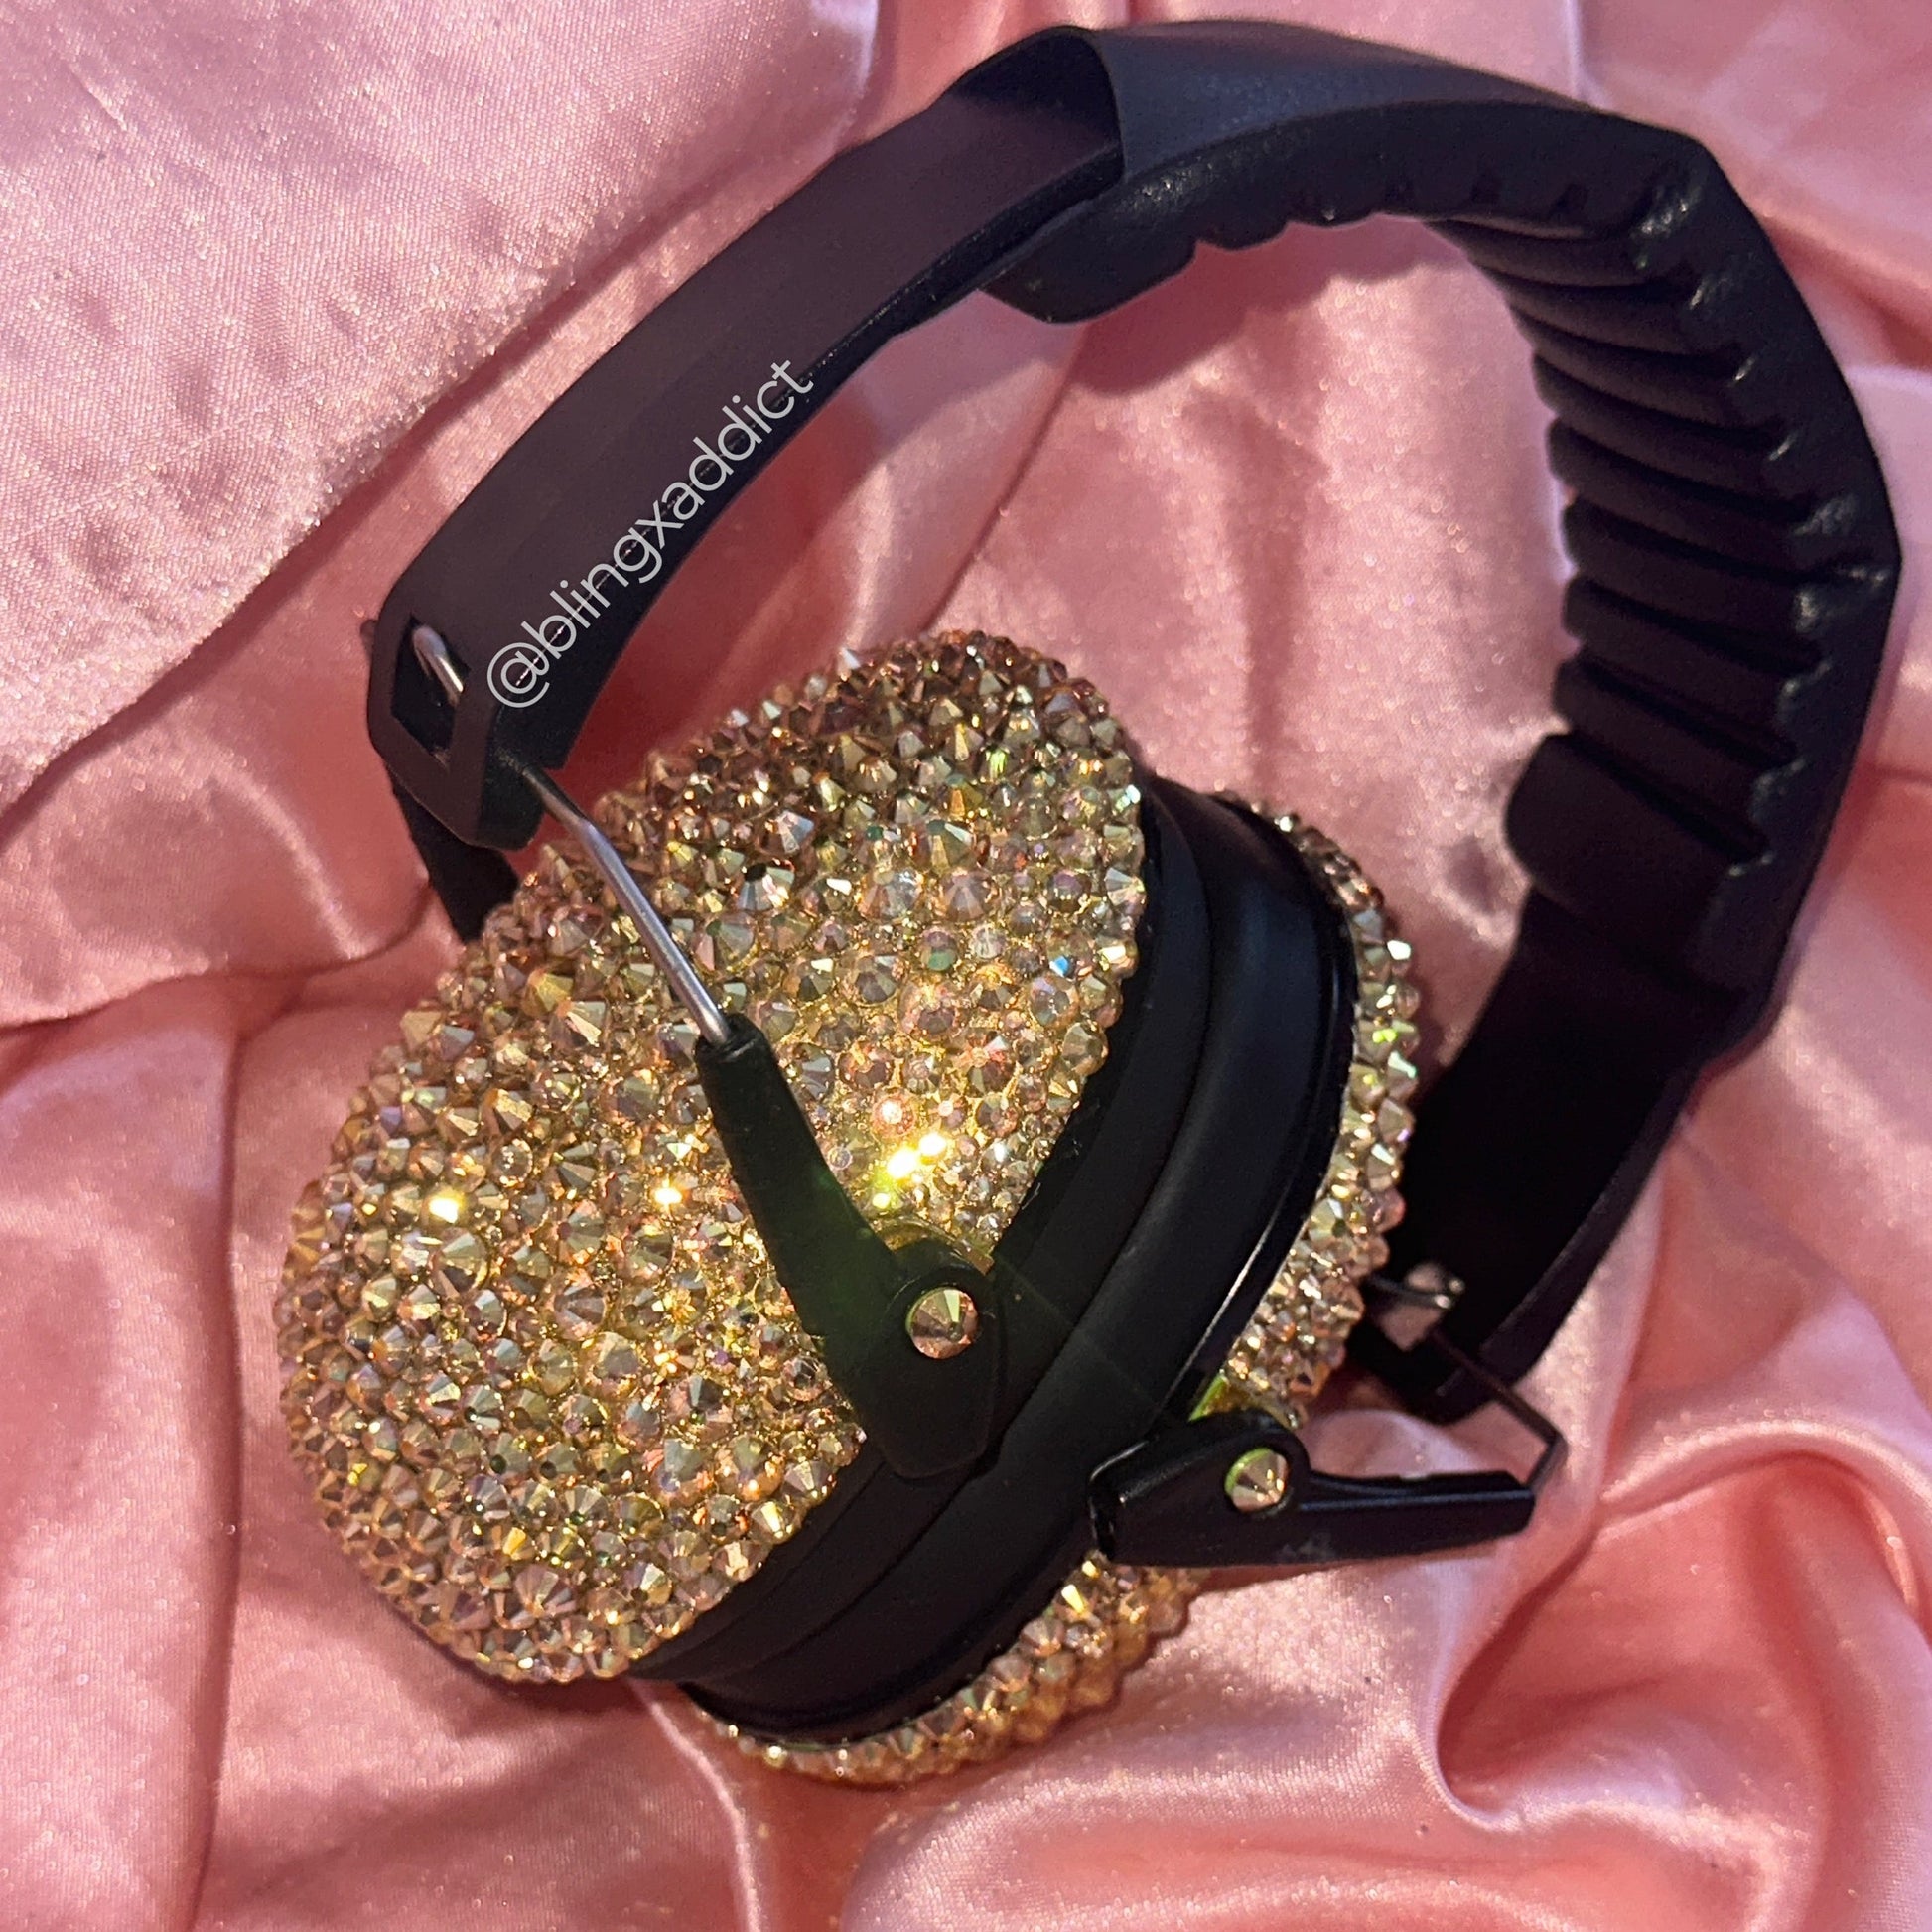 Crystalized Hearing Protection and Noise Reduction Earmuffs Lightweight, Adjustable and Foldable NRR 20dB Gold CLOTHING, SHOES & ACCESSORIES by BlingxAddict | BlingxAddict